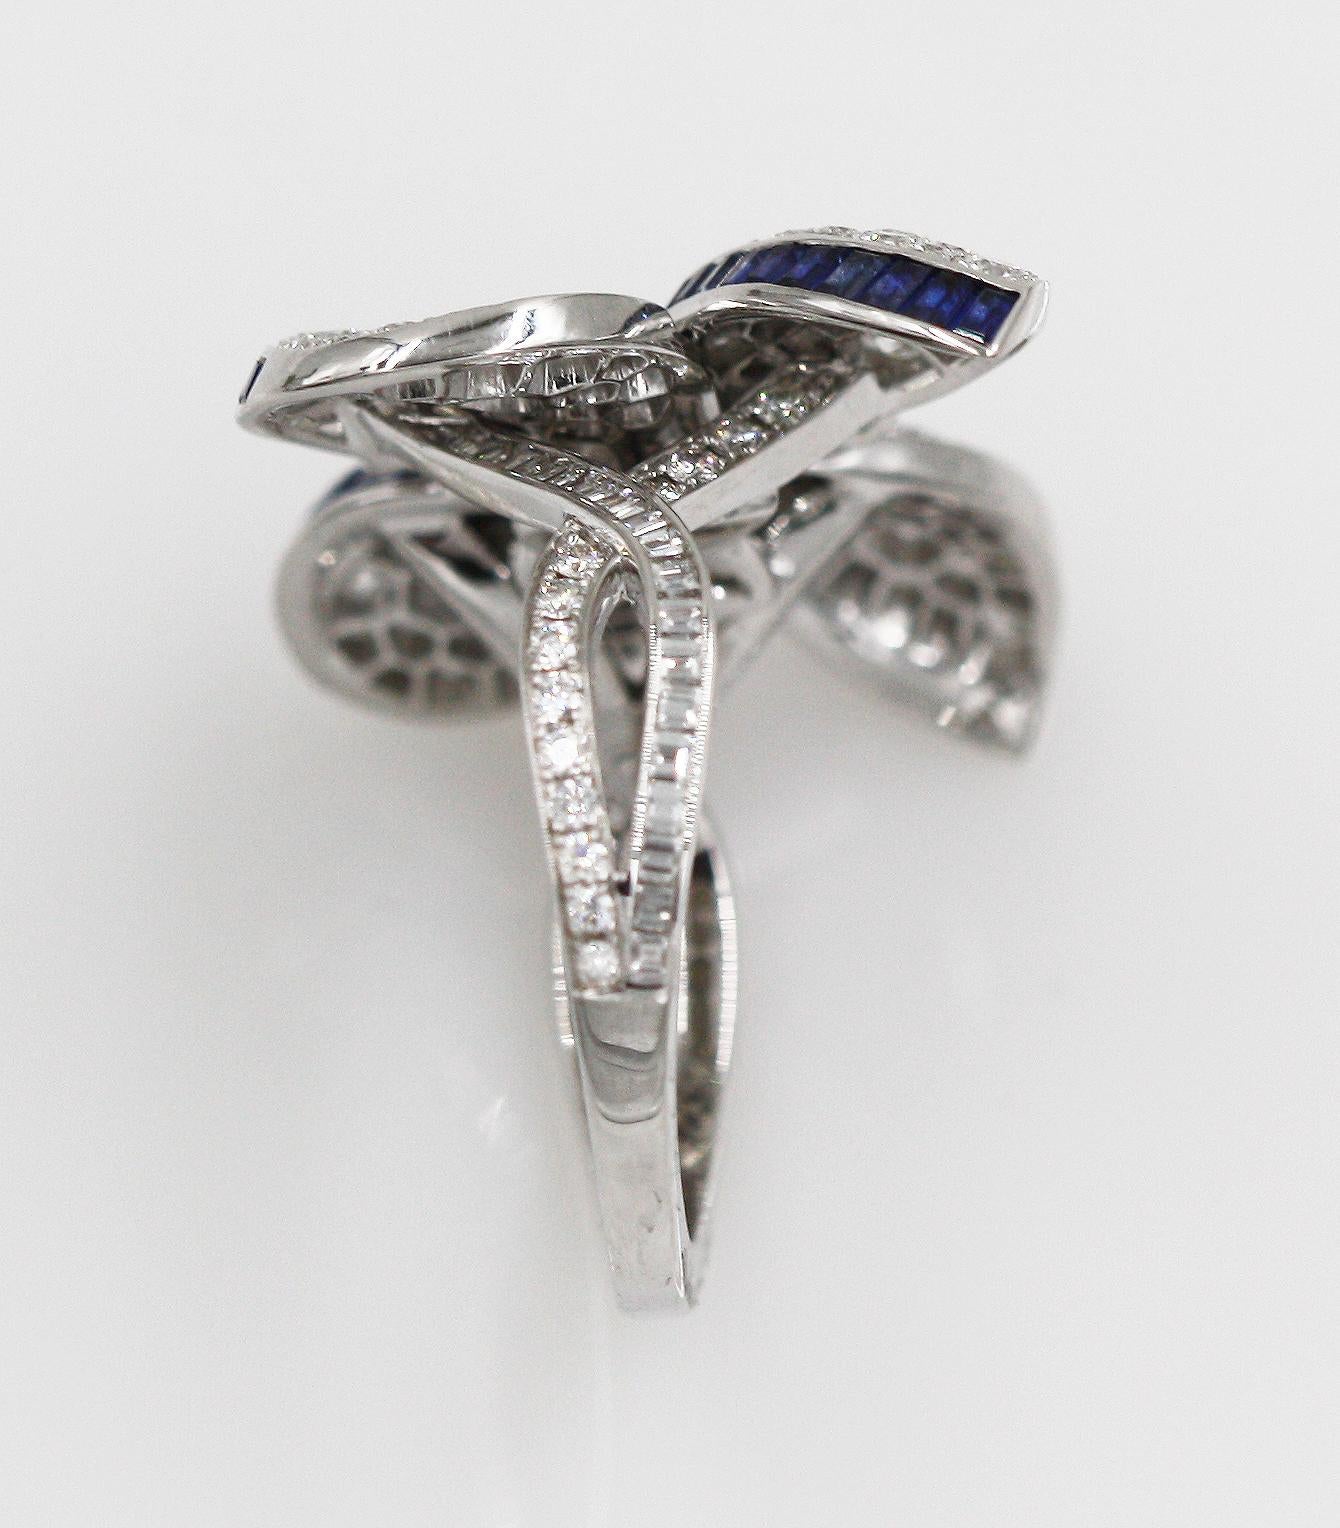 Ring Size: 50; US: 5.5 (This ring can resize by boutique).
34 Baguette Diamonds weighing approx. 0.35 Carats. 
139 Round Diamonds weighing approx. 1.75 Carats. Fine White. Clarity: VS+
48 Baguette Blue Sapphires weighing approx. 0.87 Carats.
Total